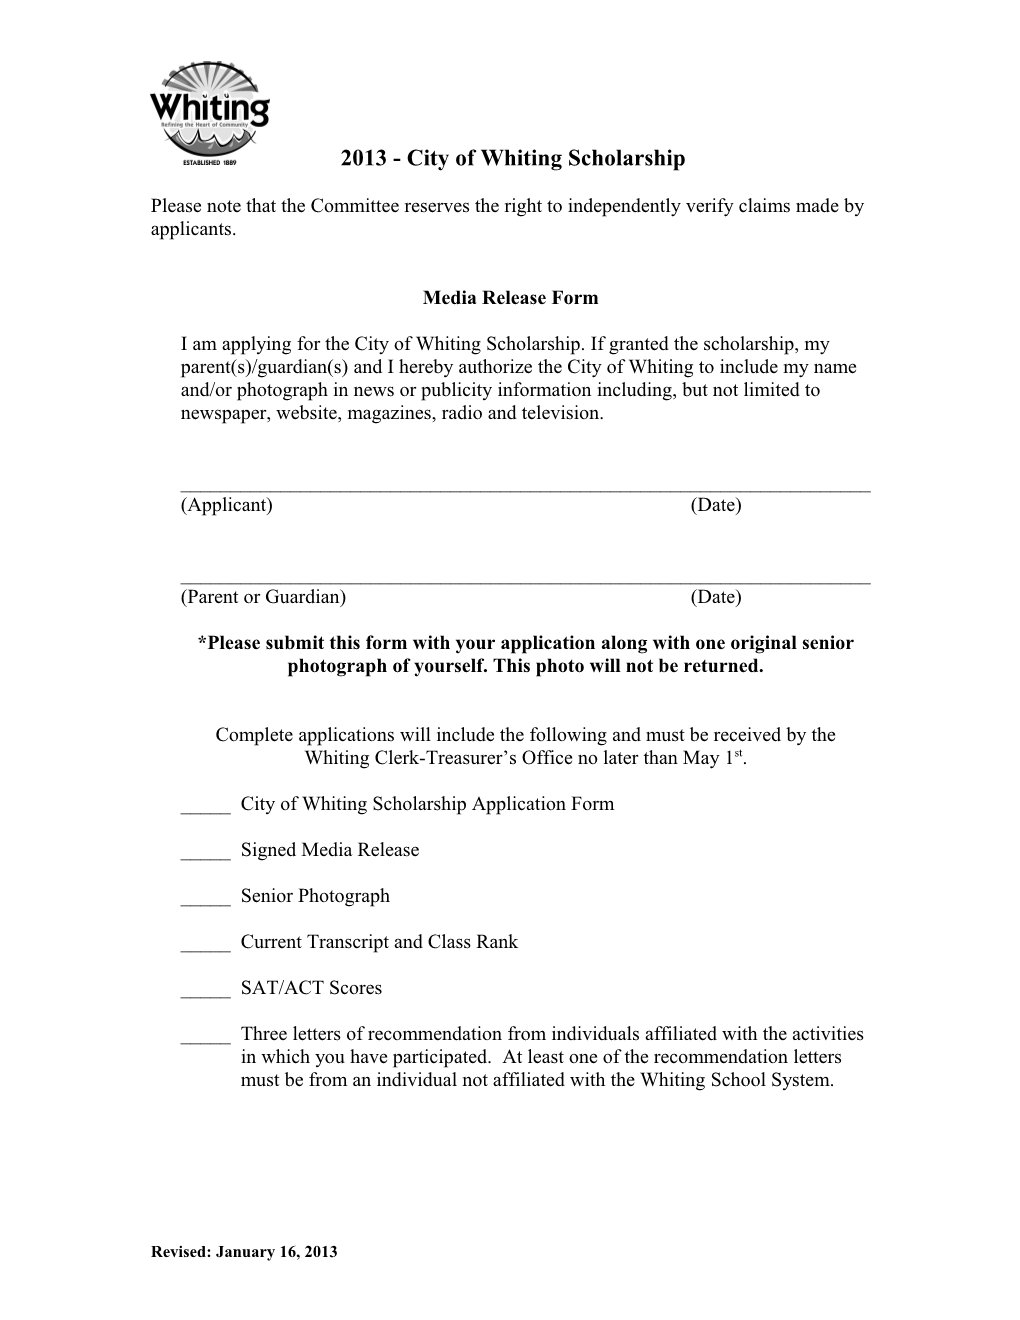 The City of Whiting Scholarship